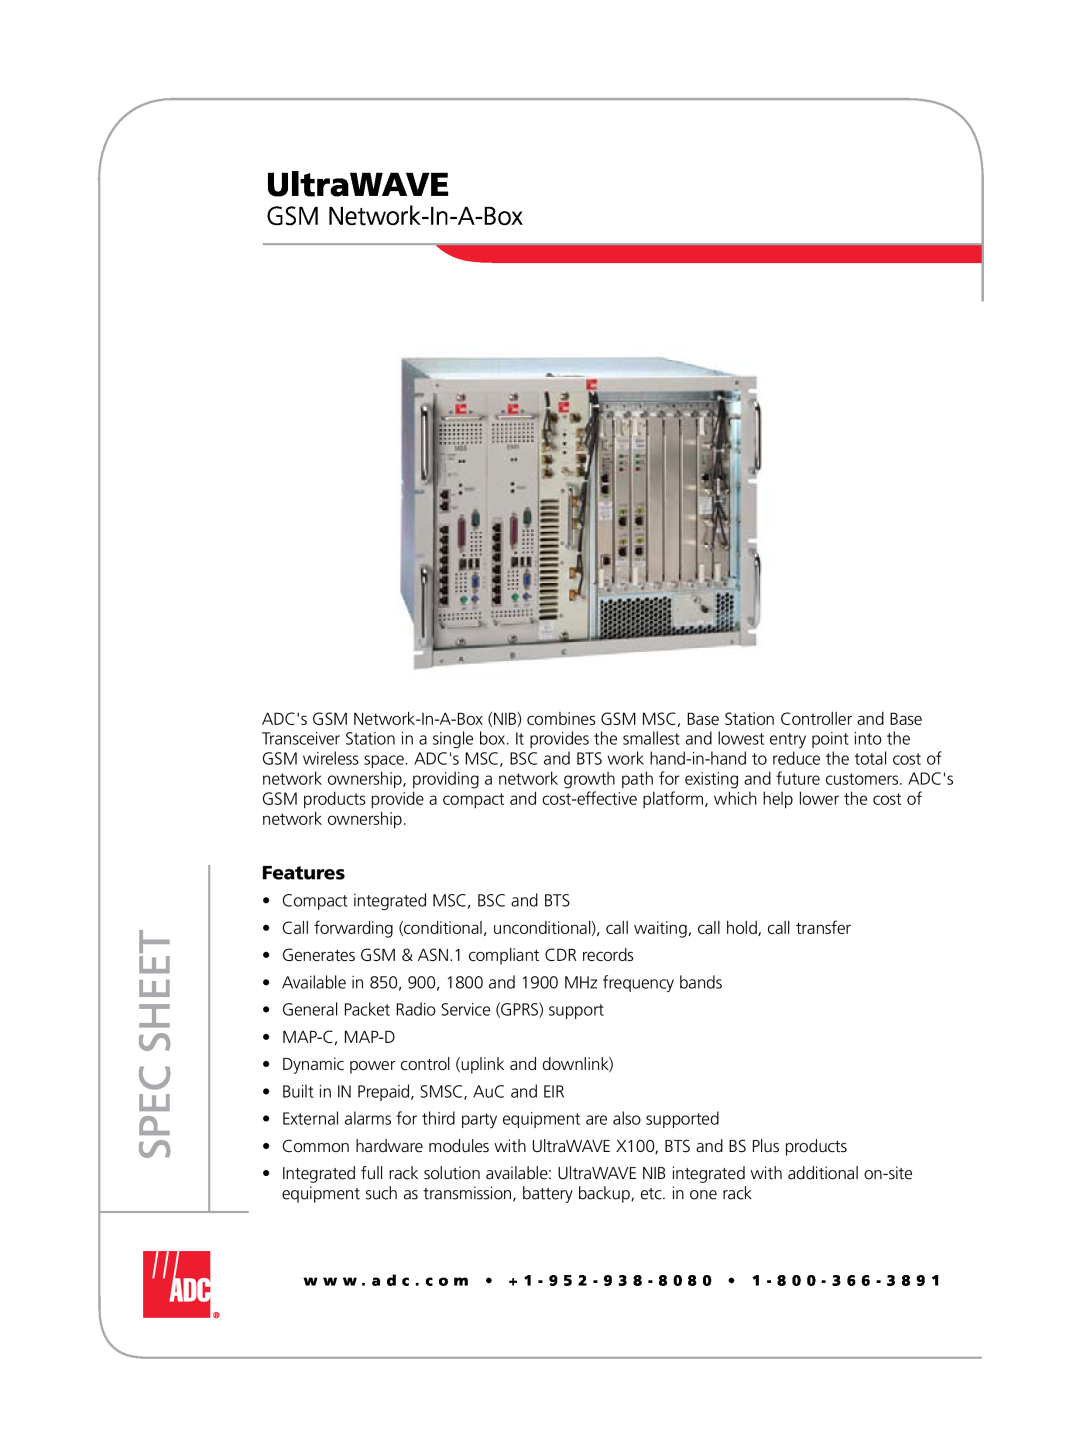 ADC 105968AE manual UltraWAVE, GSM Network-In-A-Box, Spec Sheet, Features 